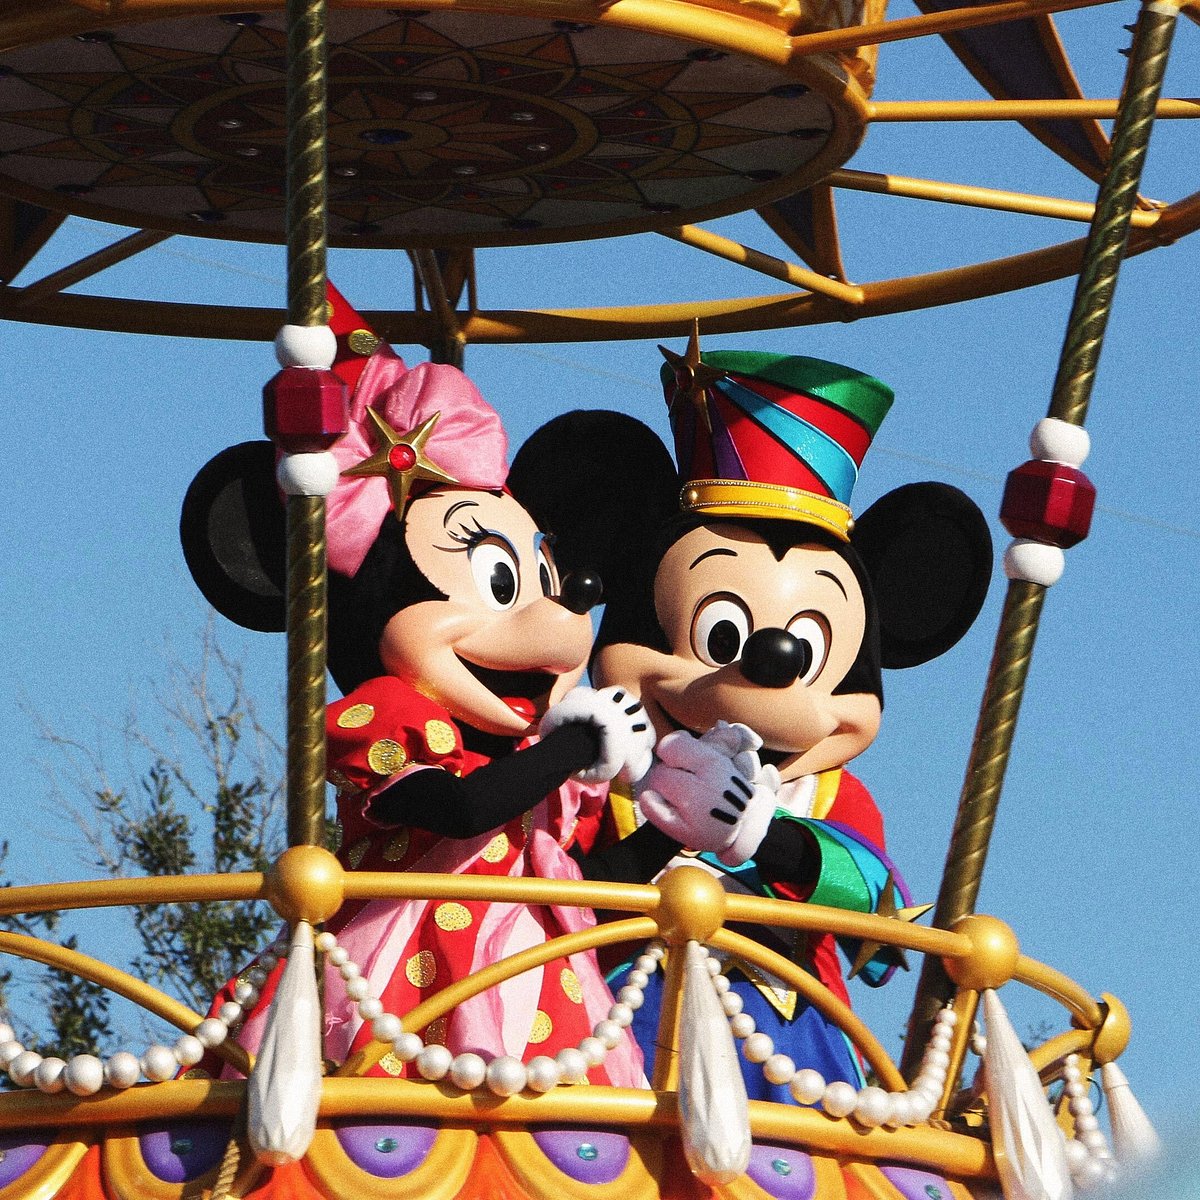 What Are The Best Days To Skip The Crowds At Each Disney World